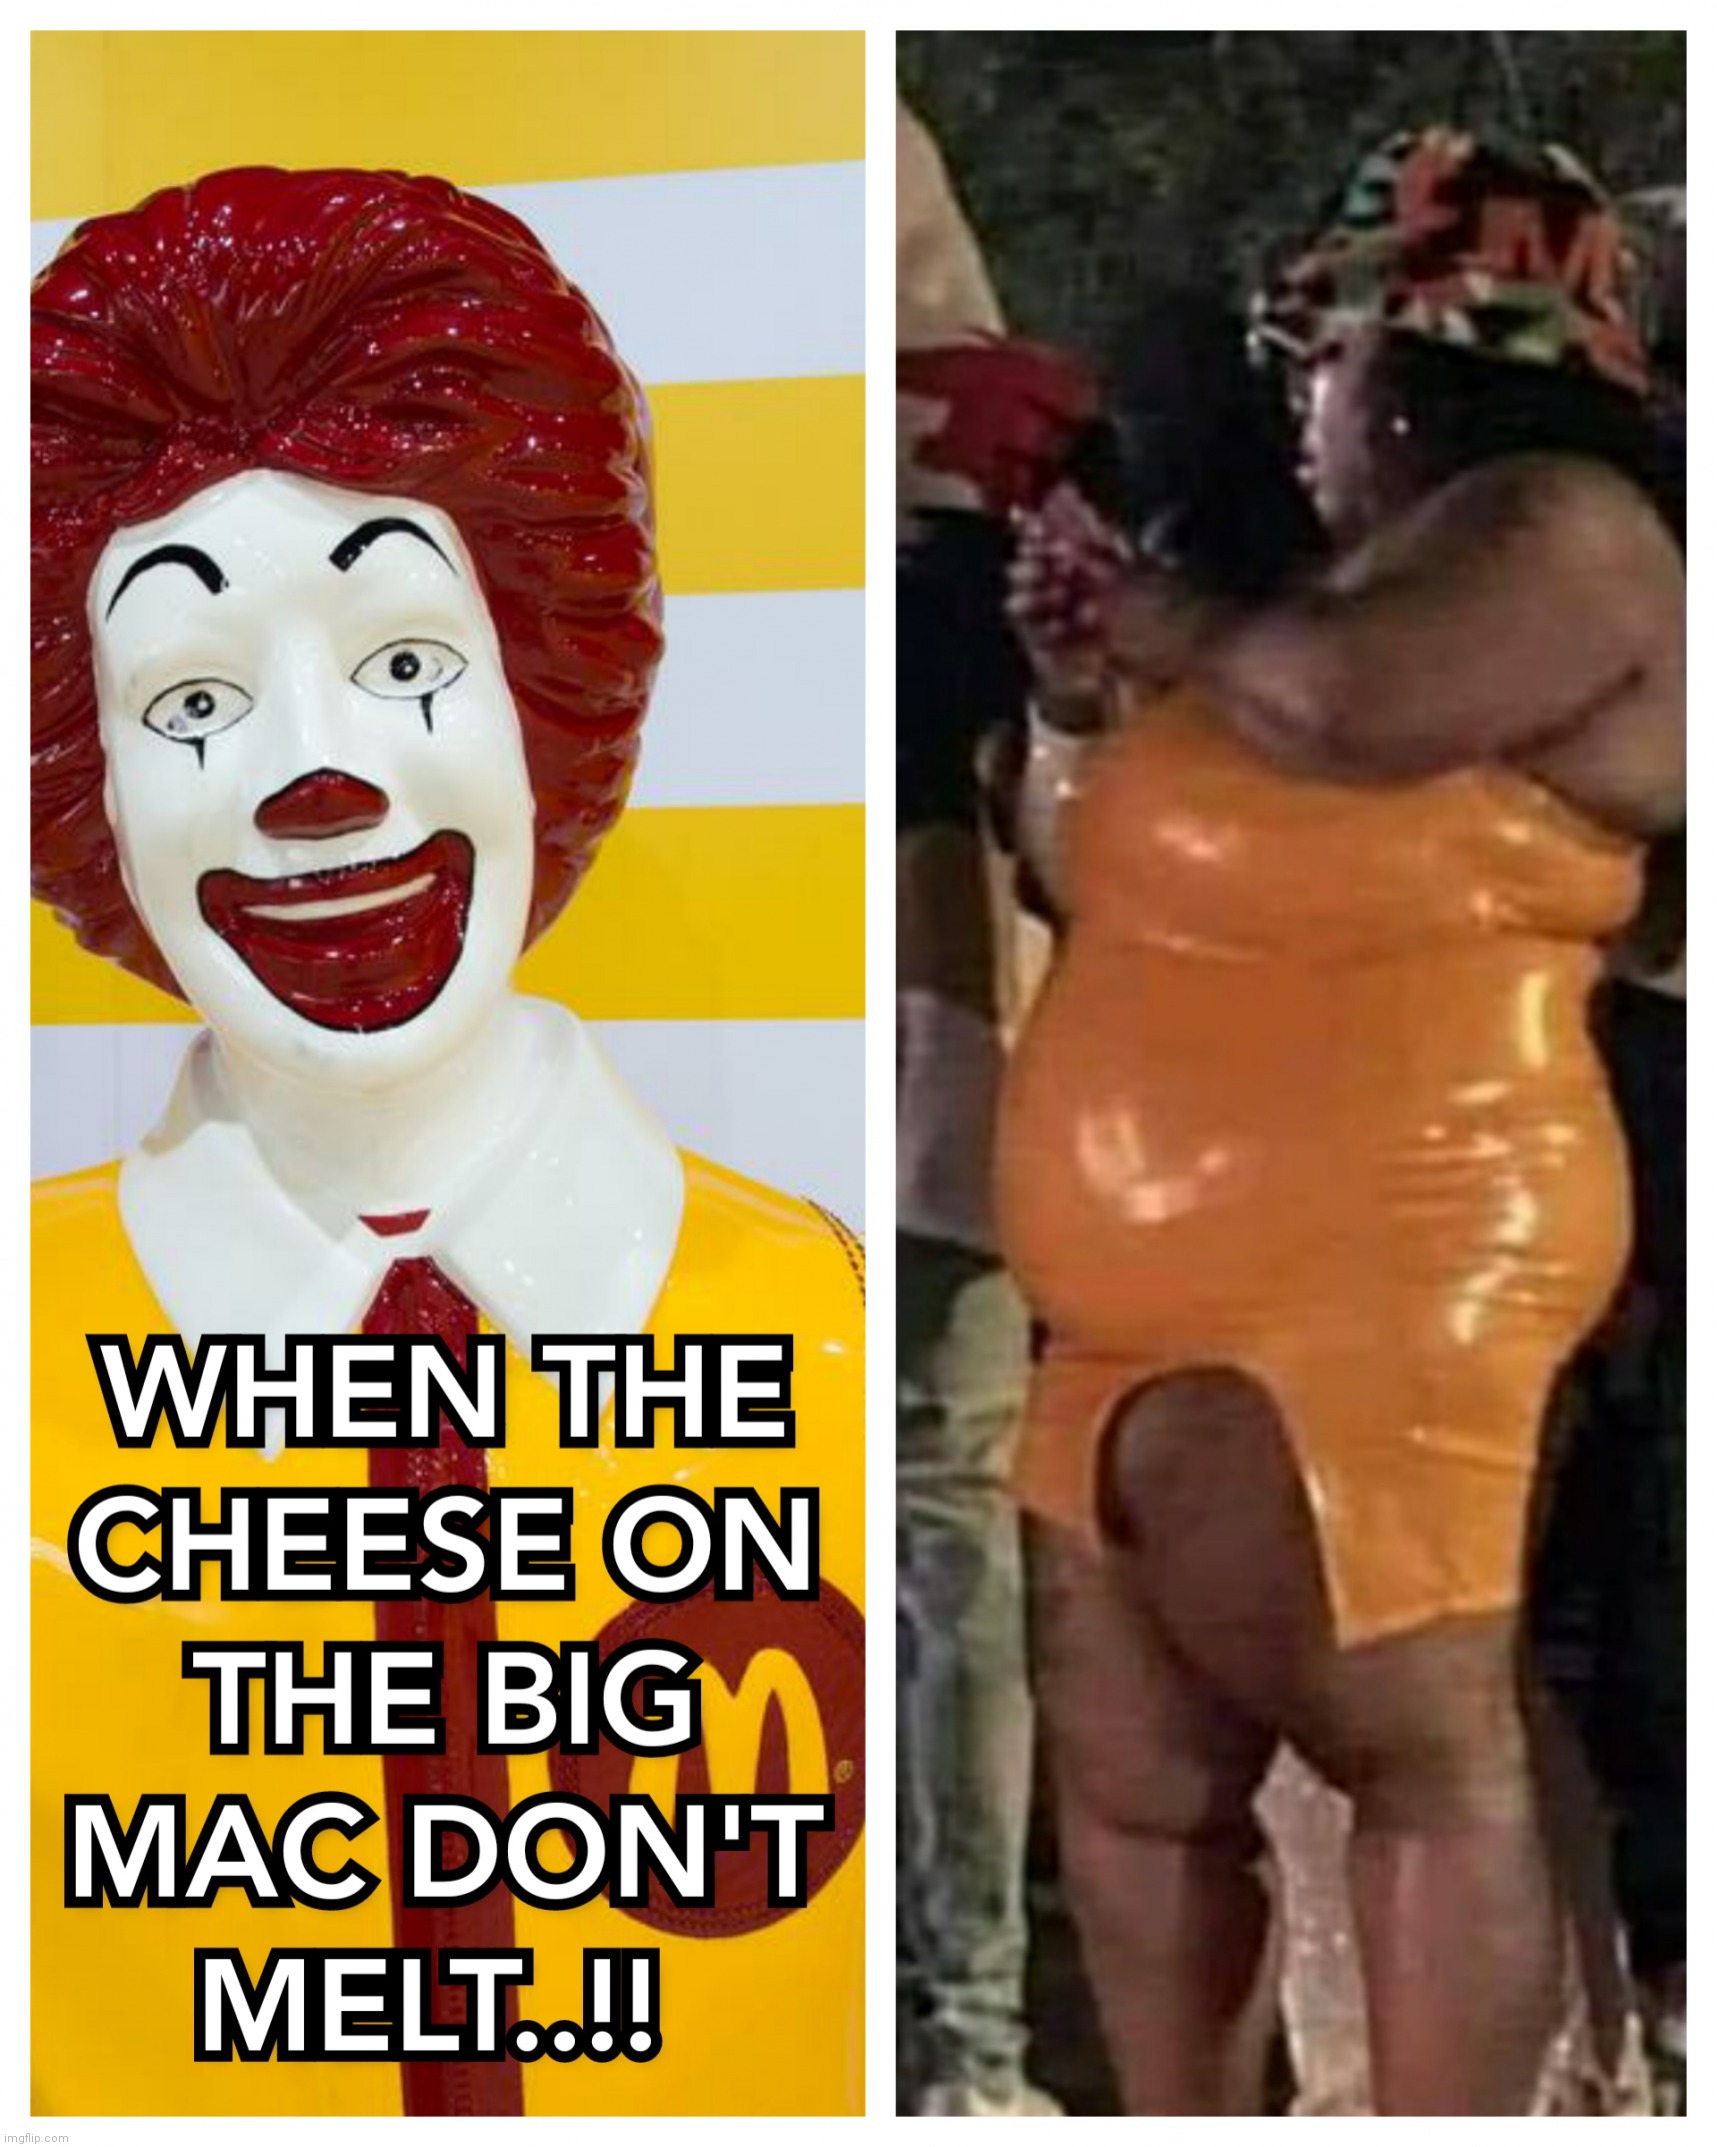 WHEN THE CHEESE ON THE BIG MAC DON'T MELT..!! | image tagged in big mac,cheese,melting,obesity,memes,fail | made w/ Imgflip meme maker